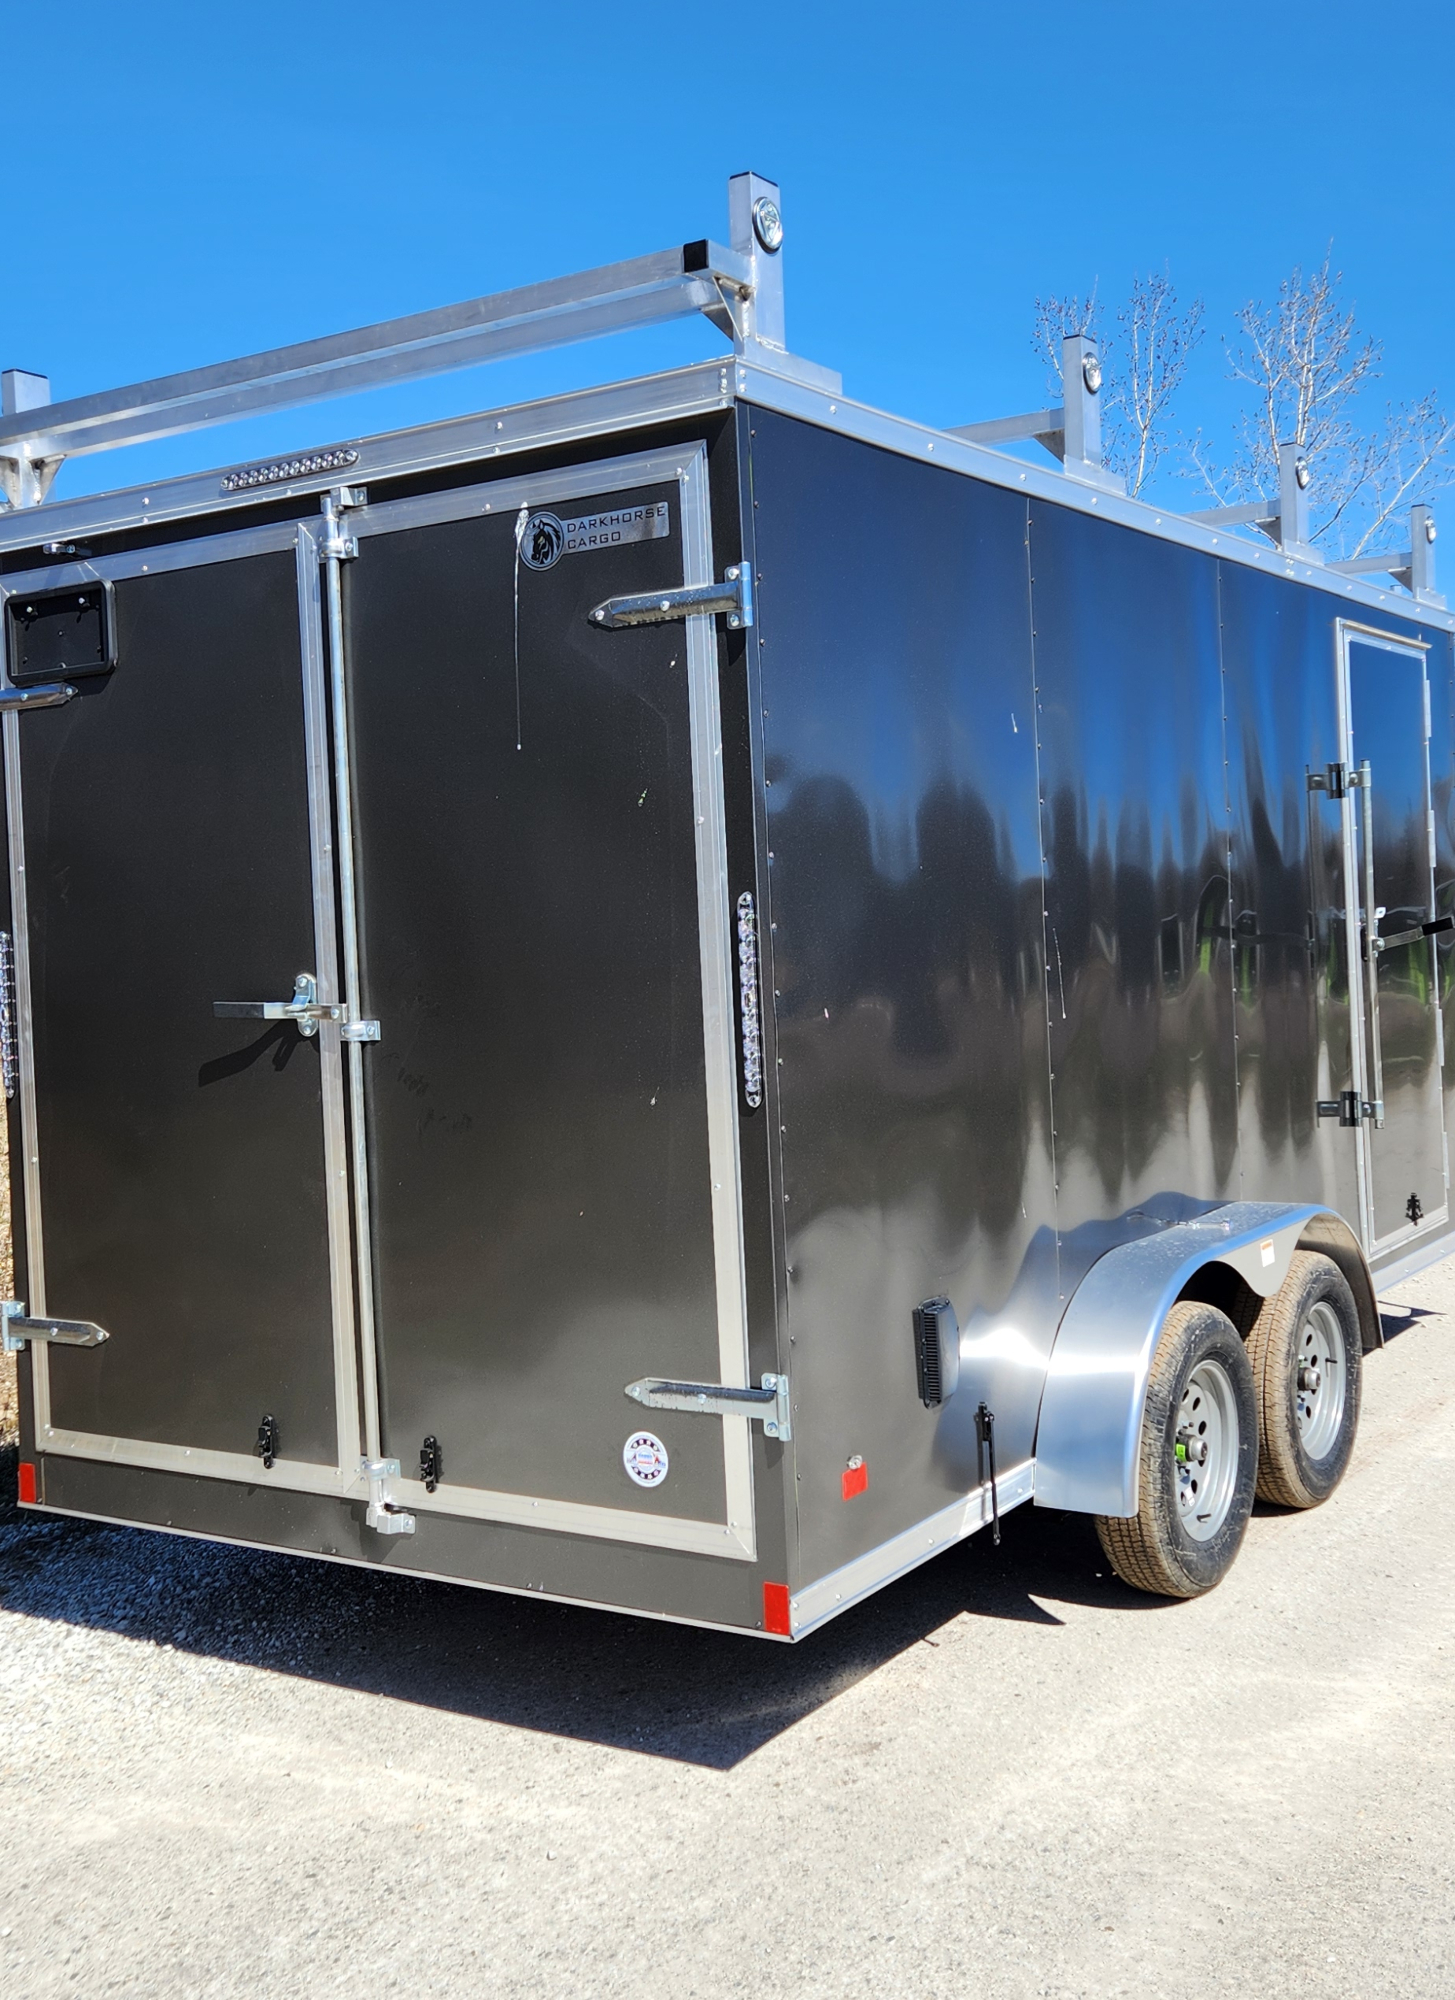 DarkHorse 7X16 Wedge Nose Tandem Axle Steel Contractor Cargo Trailer with Double Rear Doors, 12" Extra Height - 2500 Series - Charcoal